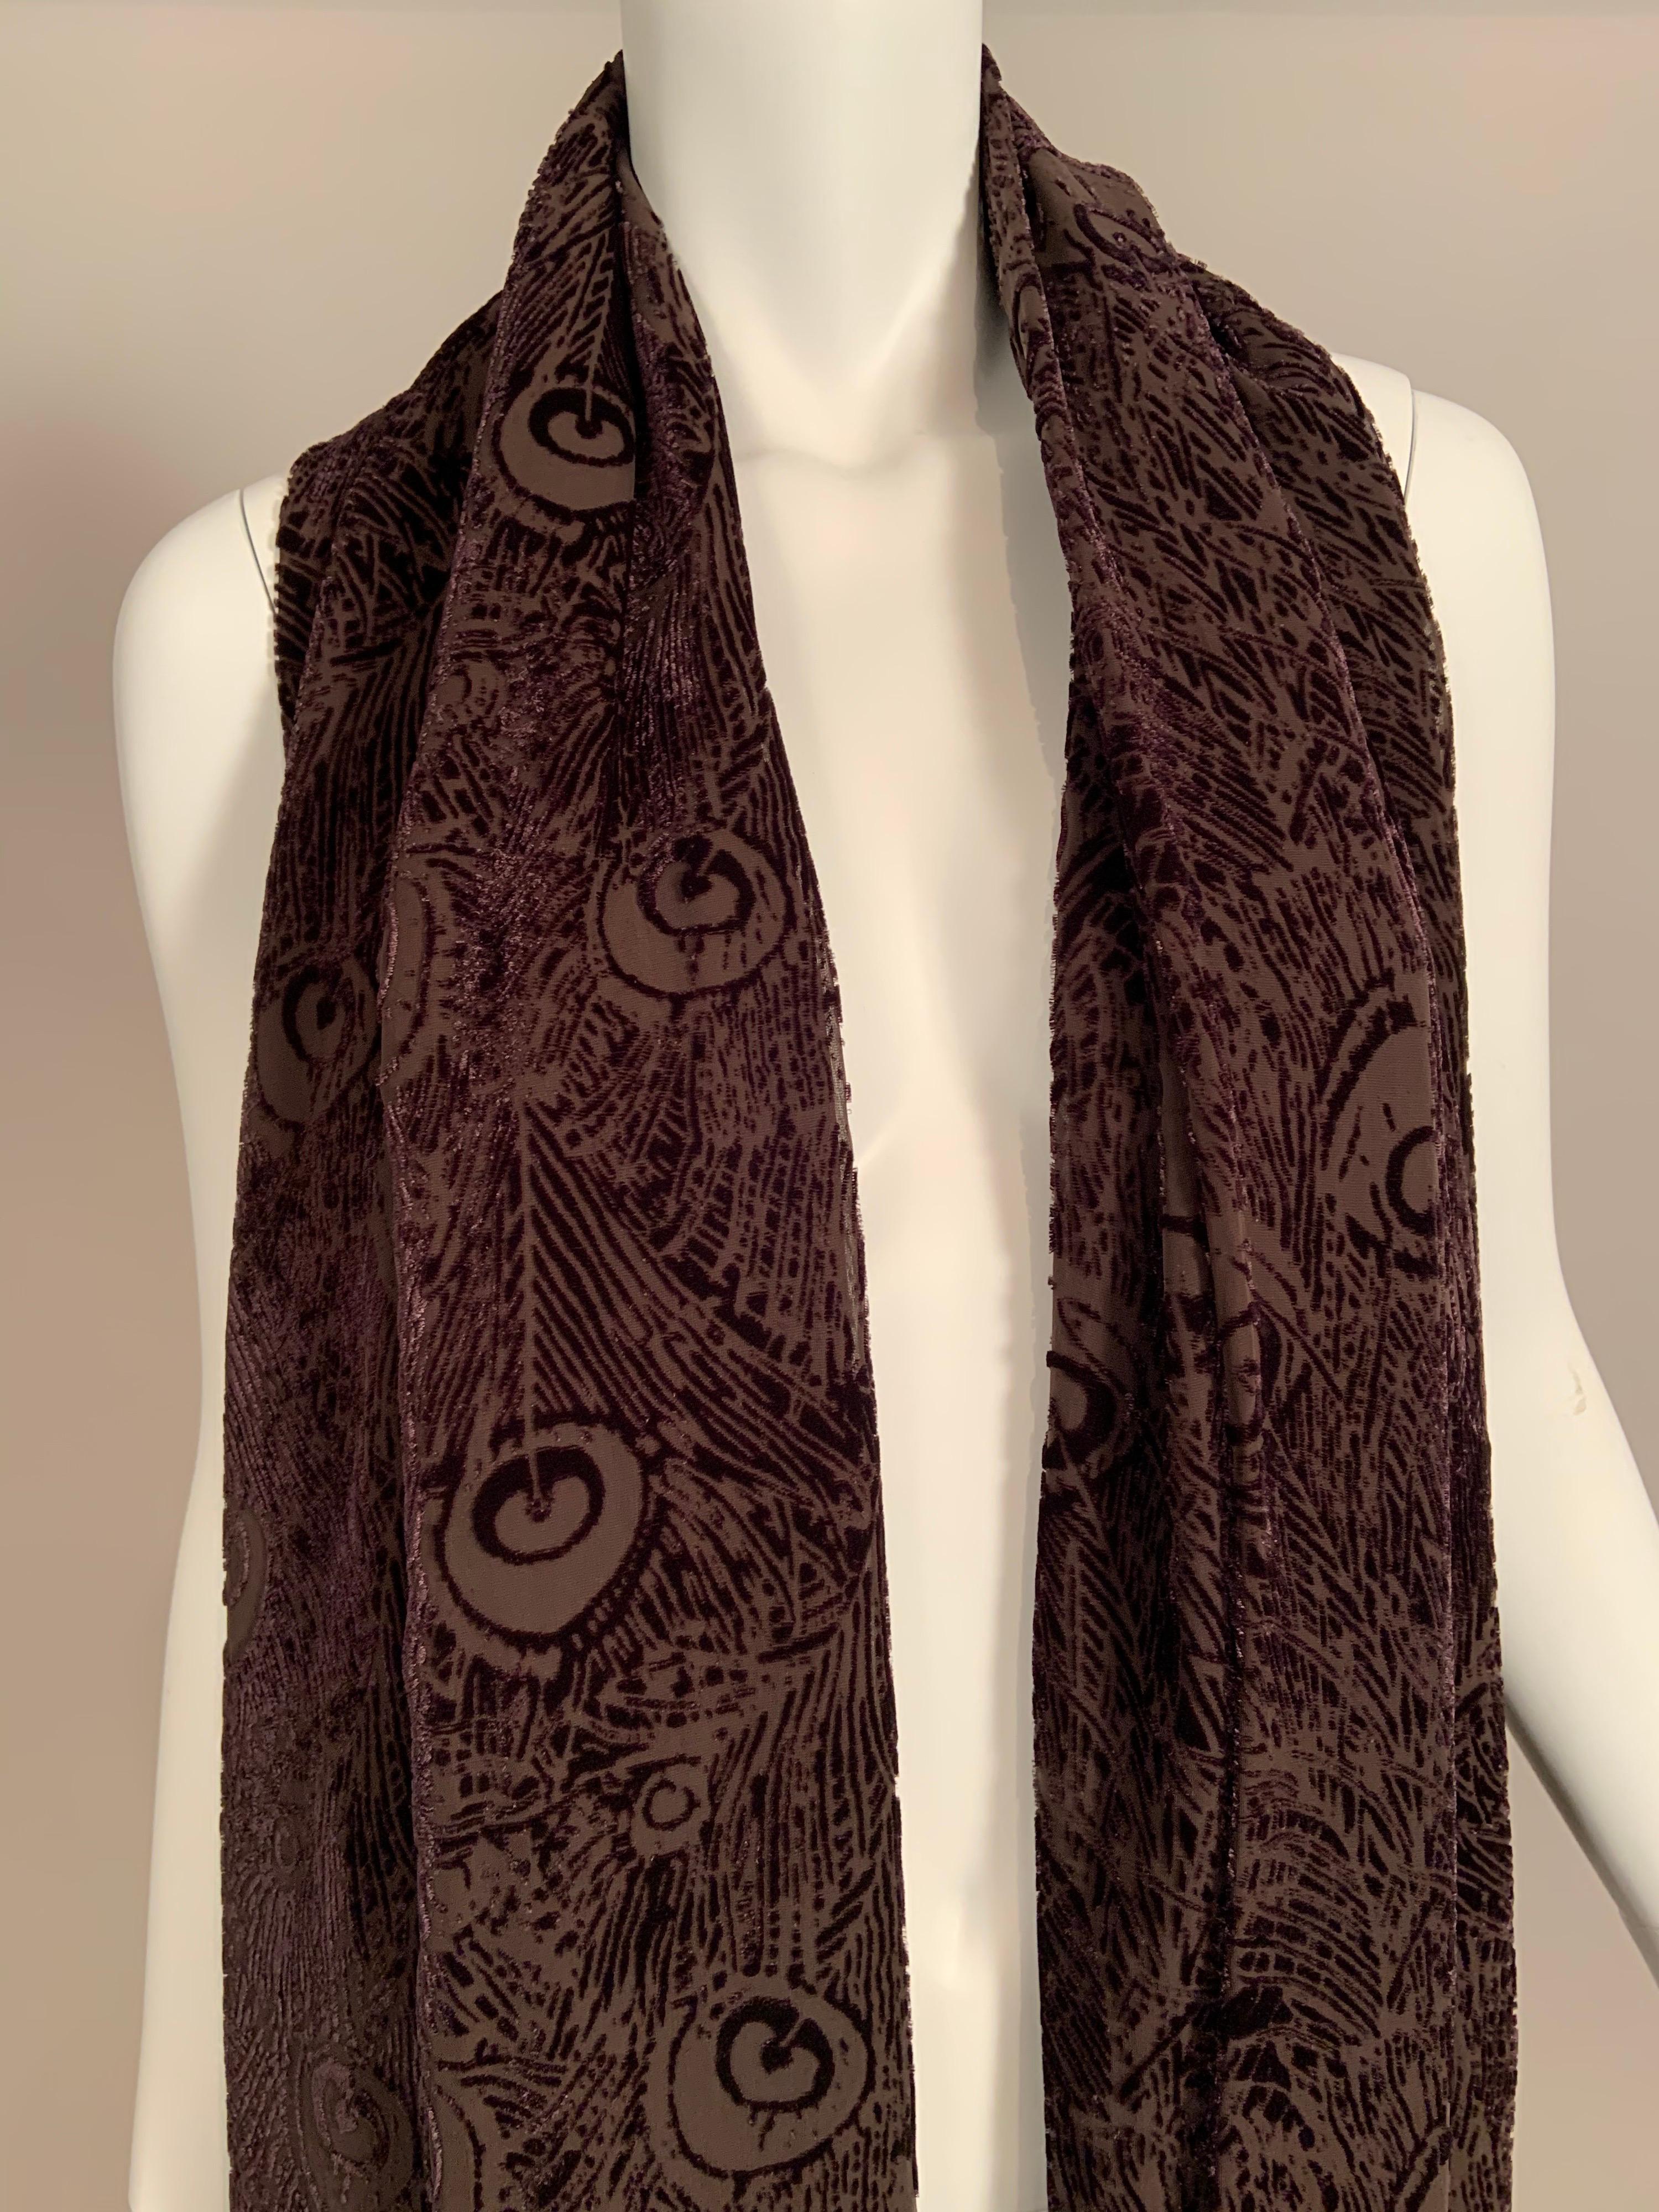 A charming Liberty of London shawl has a Peacock feather motif worked in chocolate brown voided velvet.
The shawl has black and brown fringe on the ends and it is in excellent condition.
Measurements:   Length 68